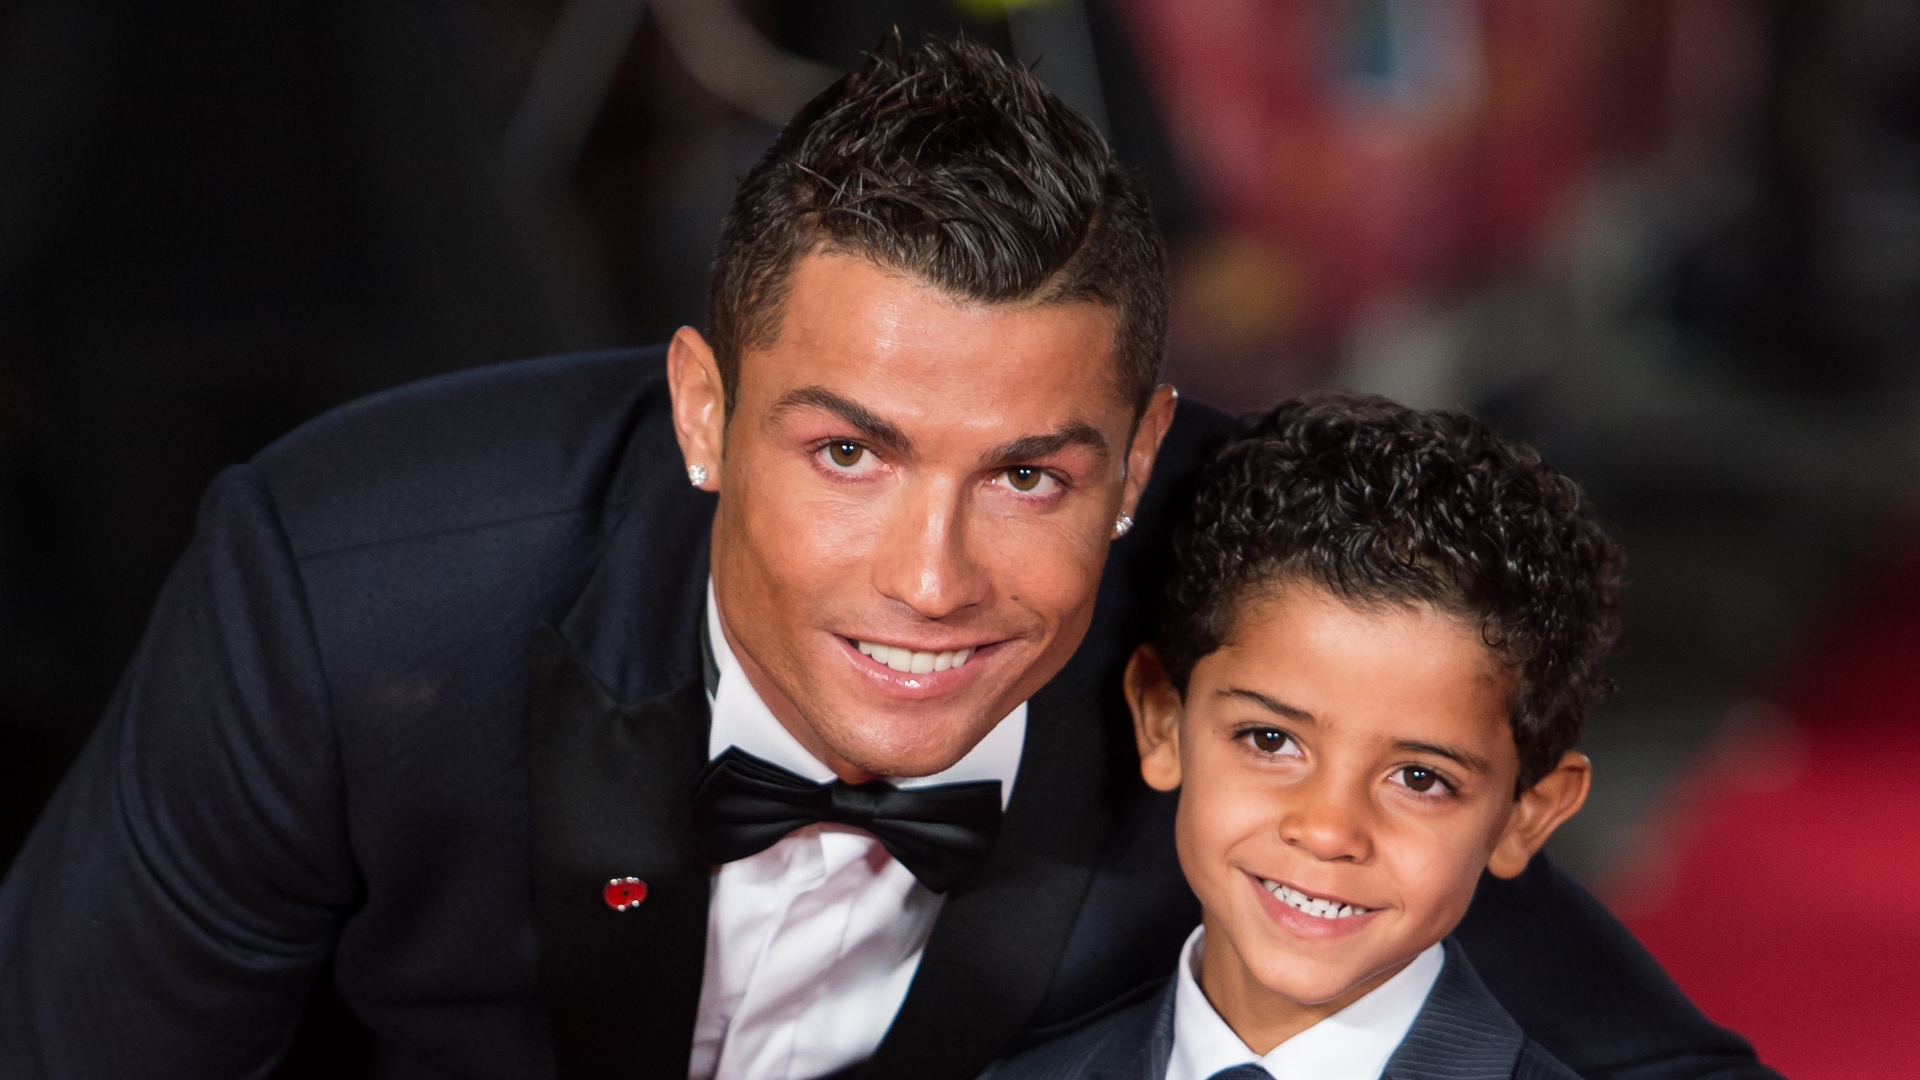 Cristiano Ronaldo Family - Cristiano Ronaldo Family Tree Father, Mother